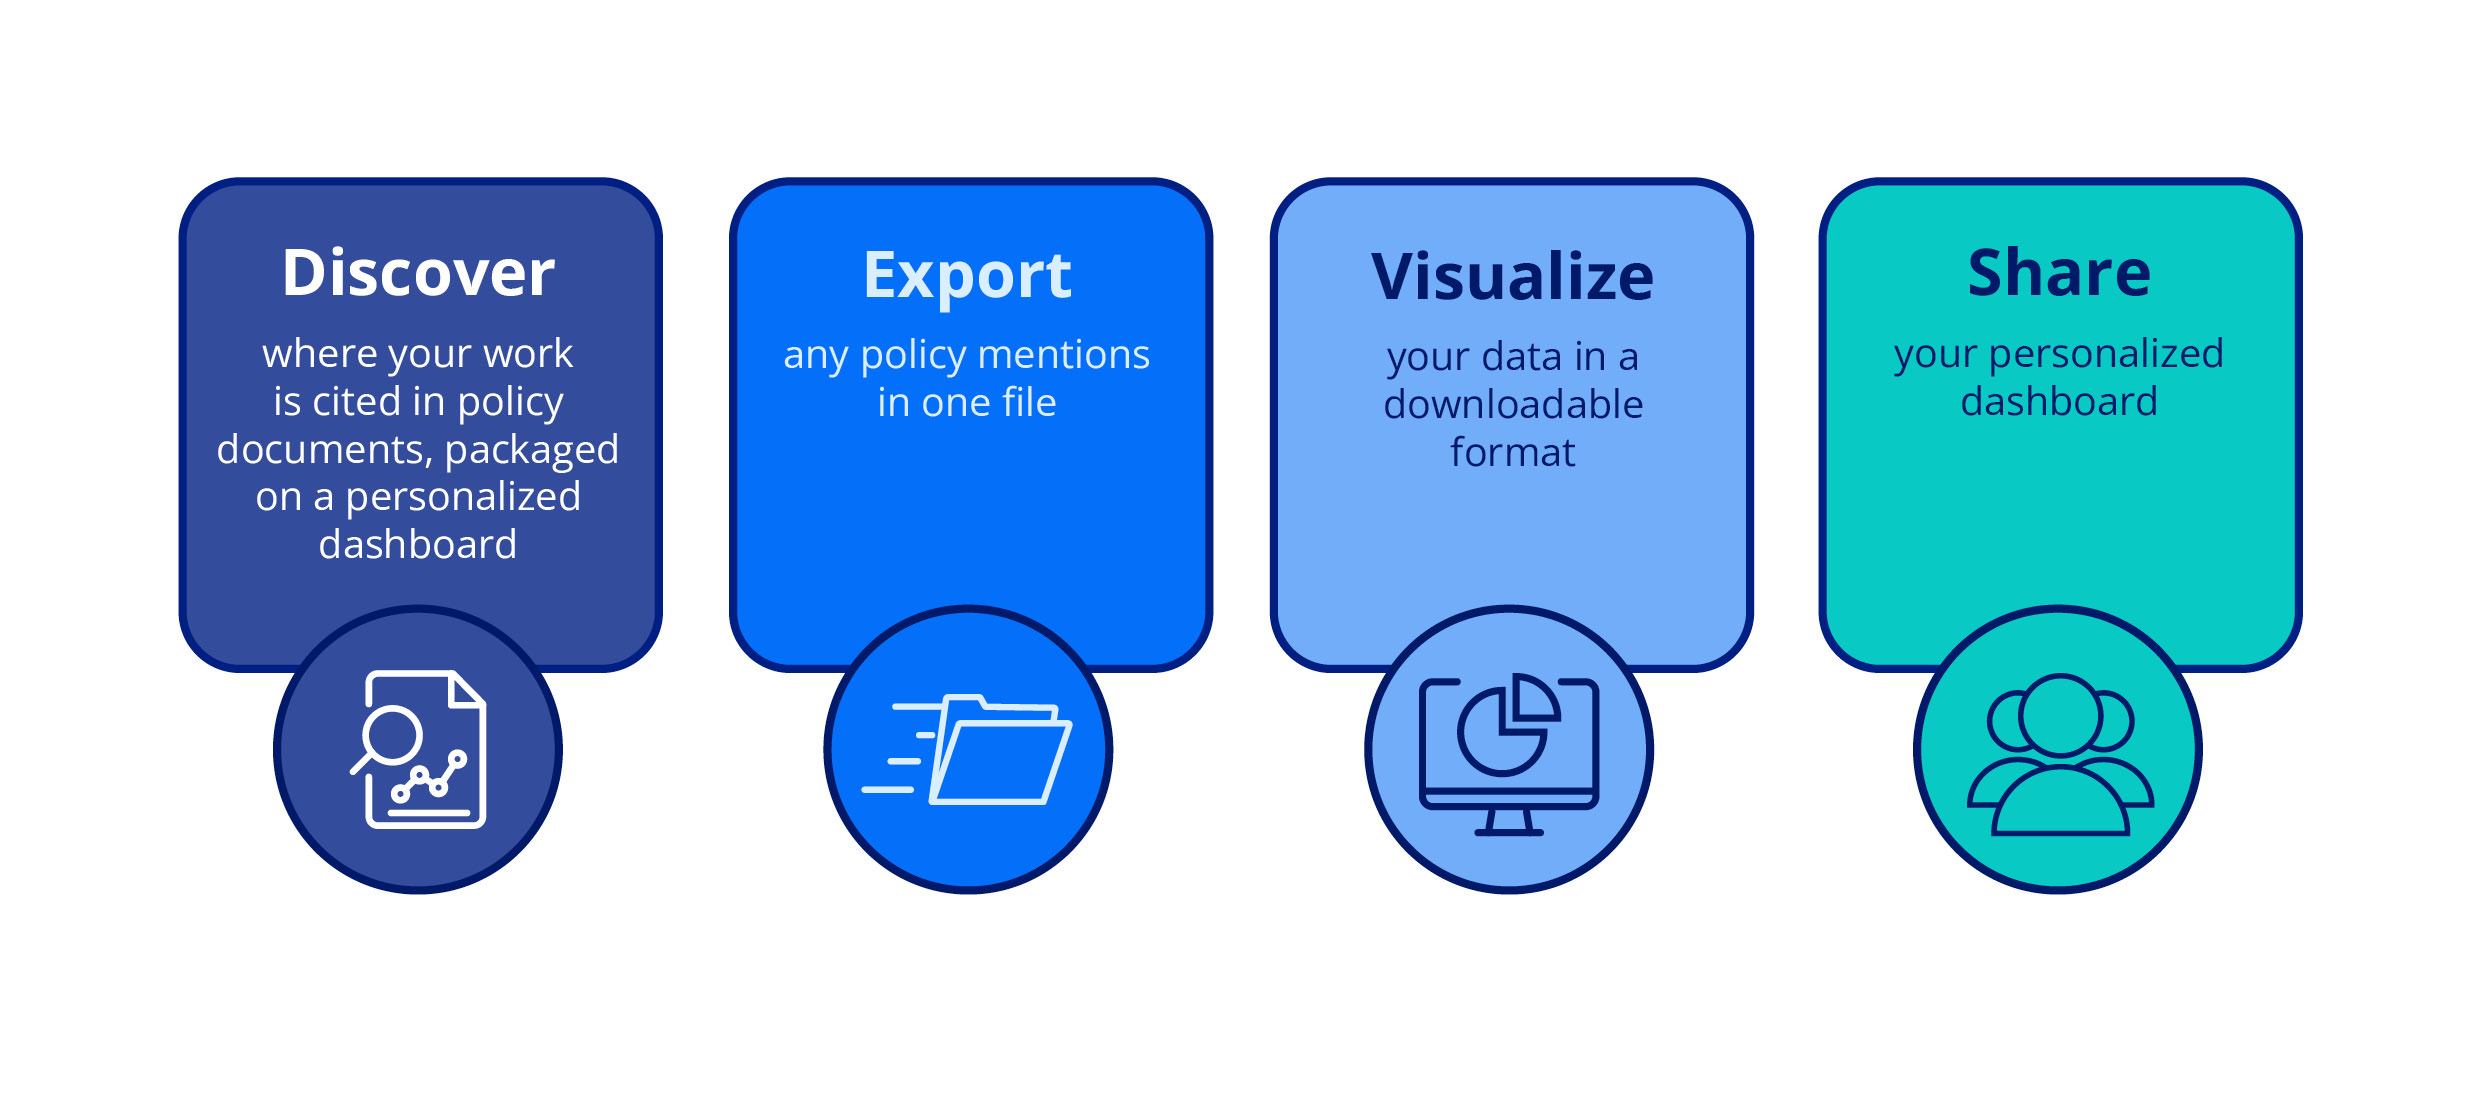 Discover where your work is cited in policy documents, packaged on a personalized dashboard. Export any policy mentions in one file. Visualize your data in a downloadable format. Share your personalized dashboard.